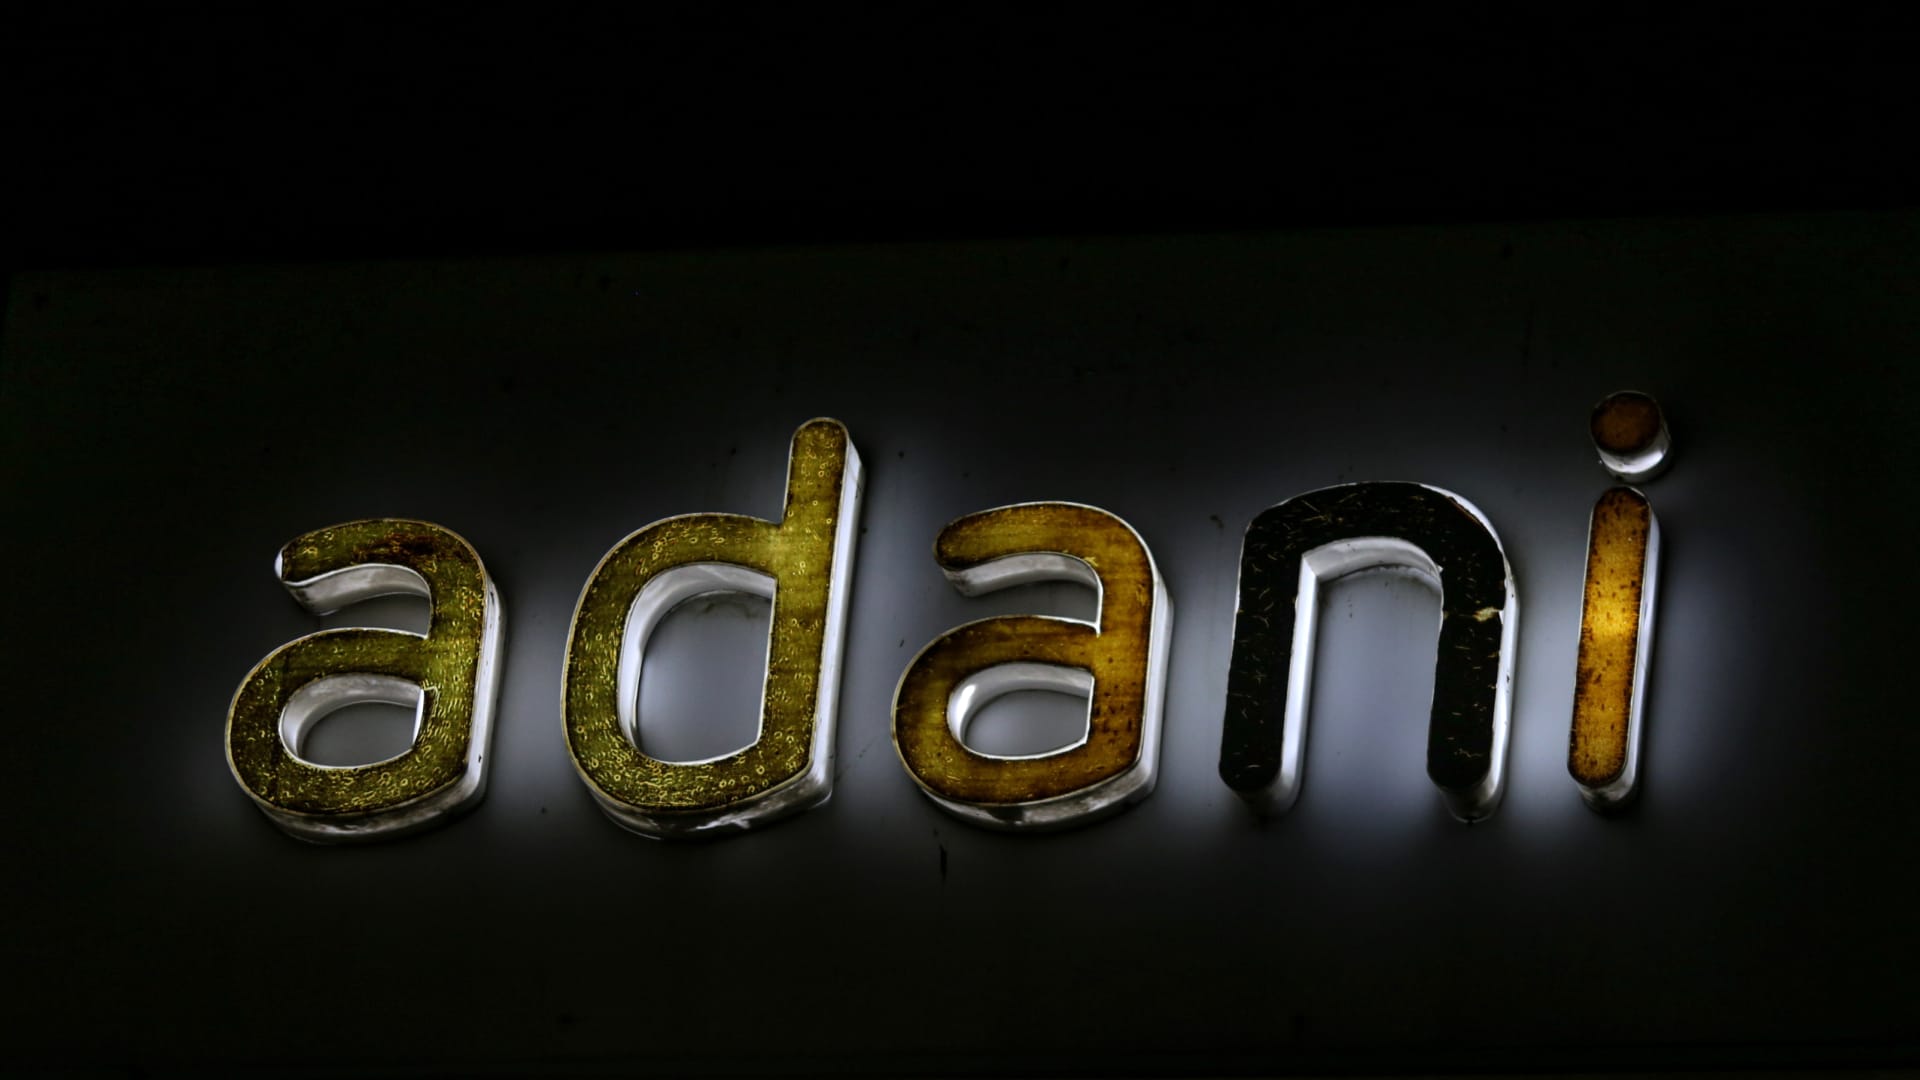 Two Adani Group firms to raise up to $2.57 billion from the market